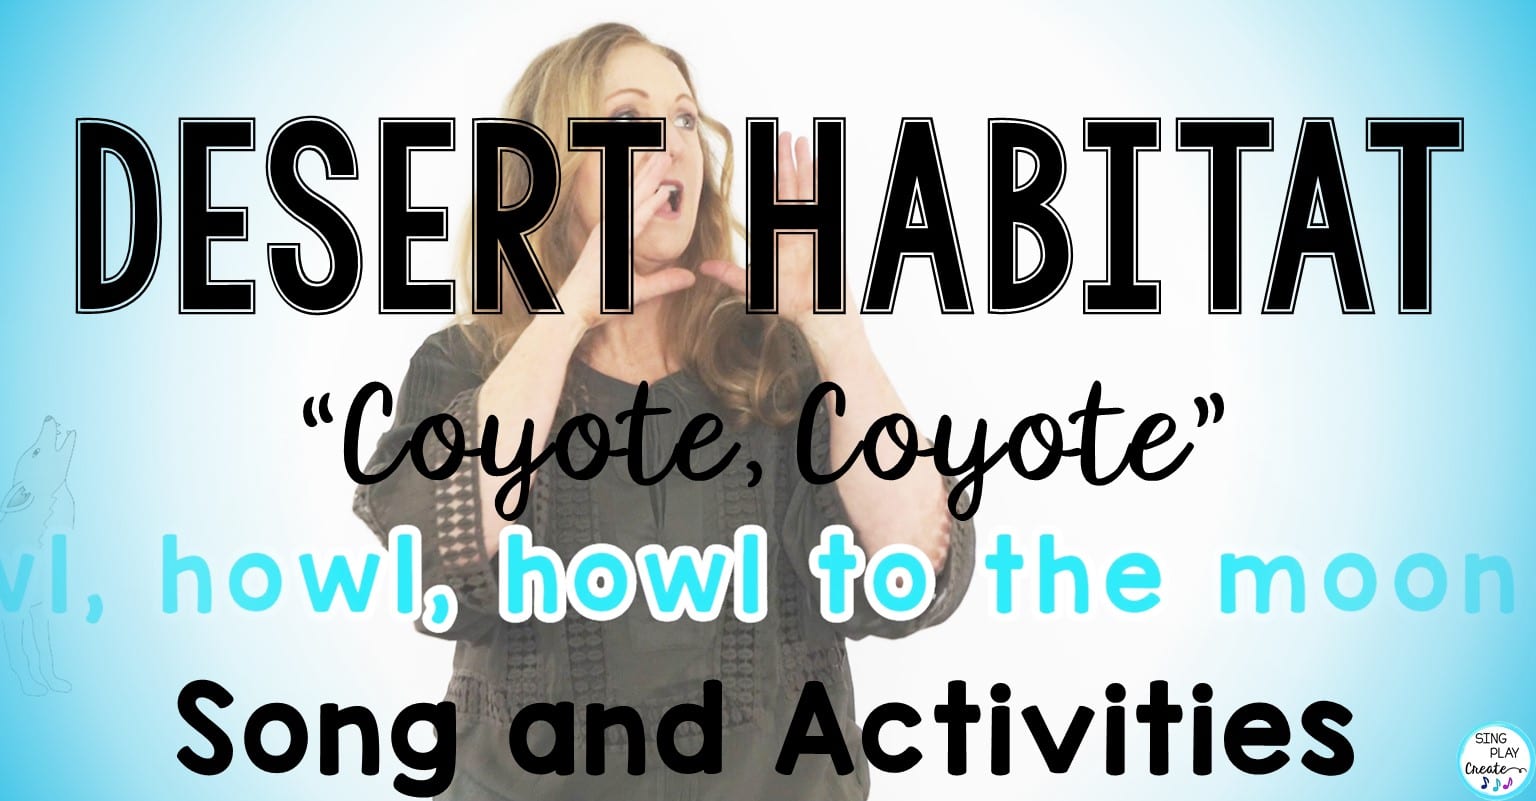 You are currently viewing Desert Habitat Educational Song “Coyote, Coyote”